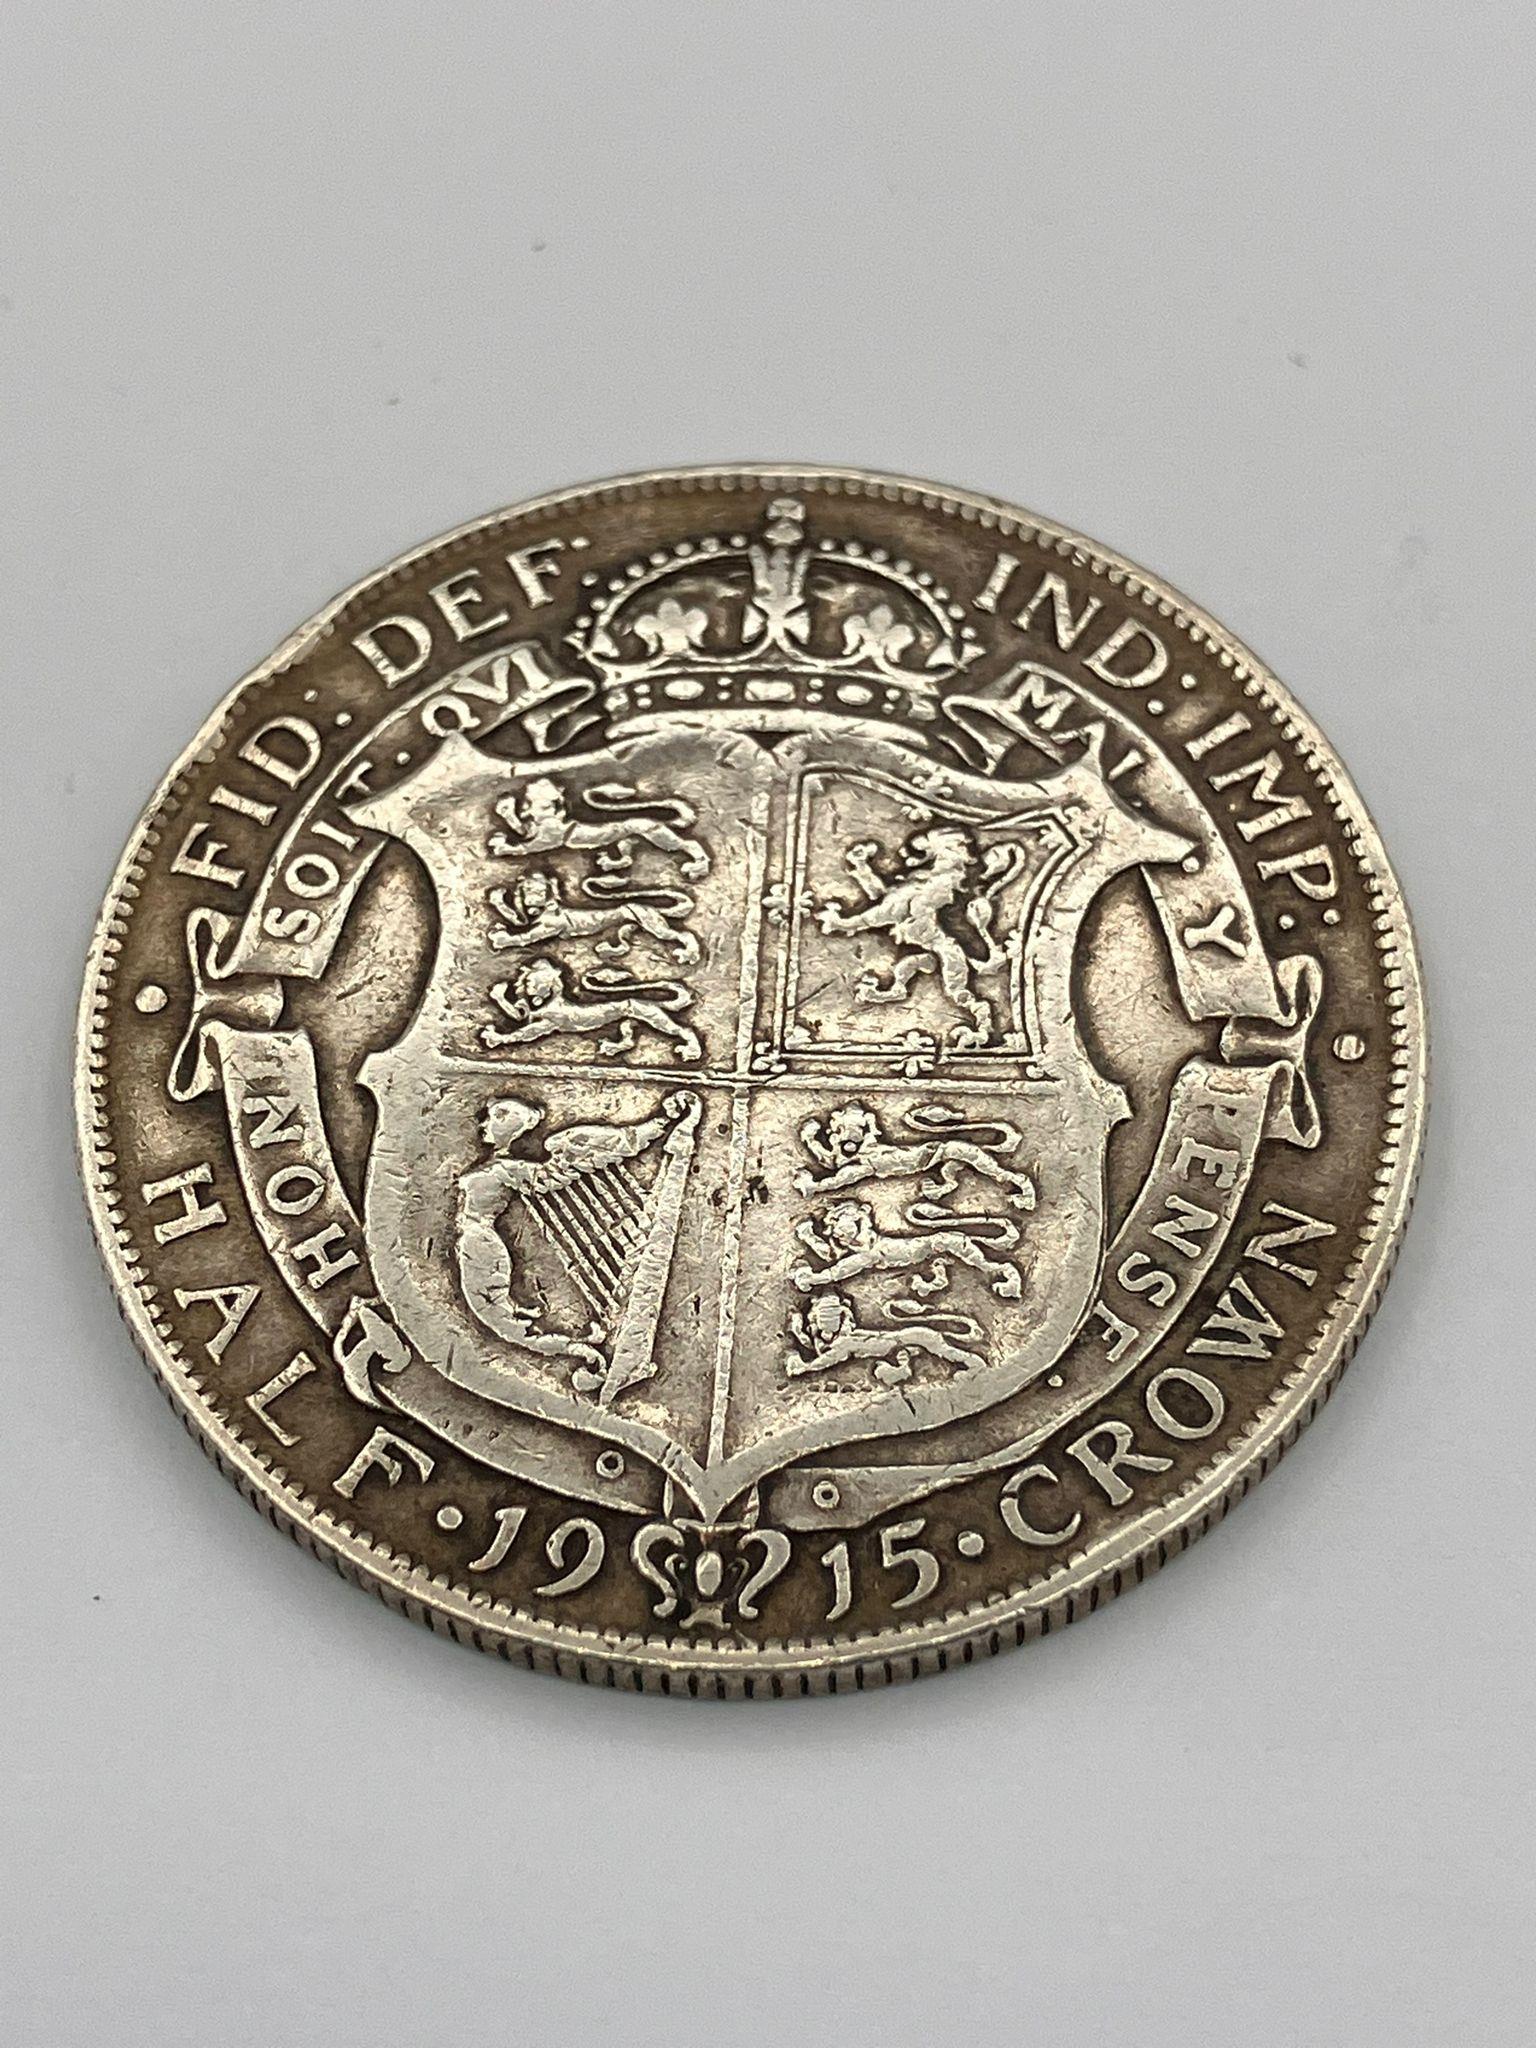 1915 SILVER HALF CROWN in Very Fine Condition. Having clear raised definition to both sides.